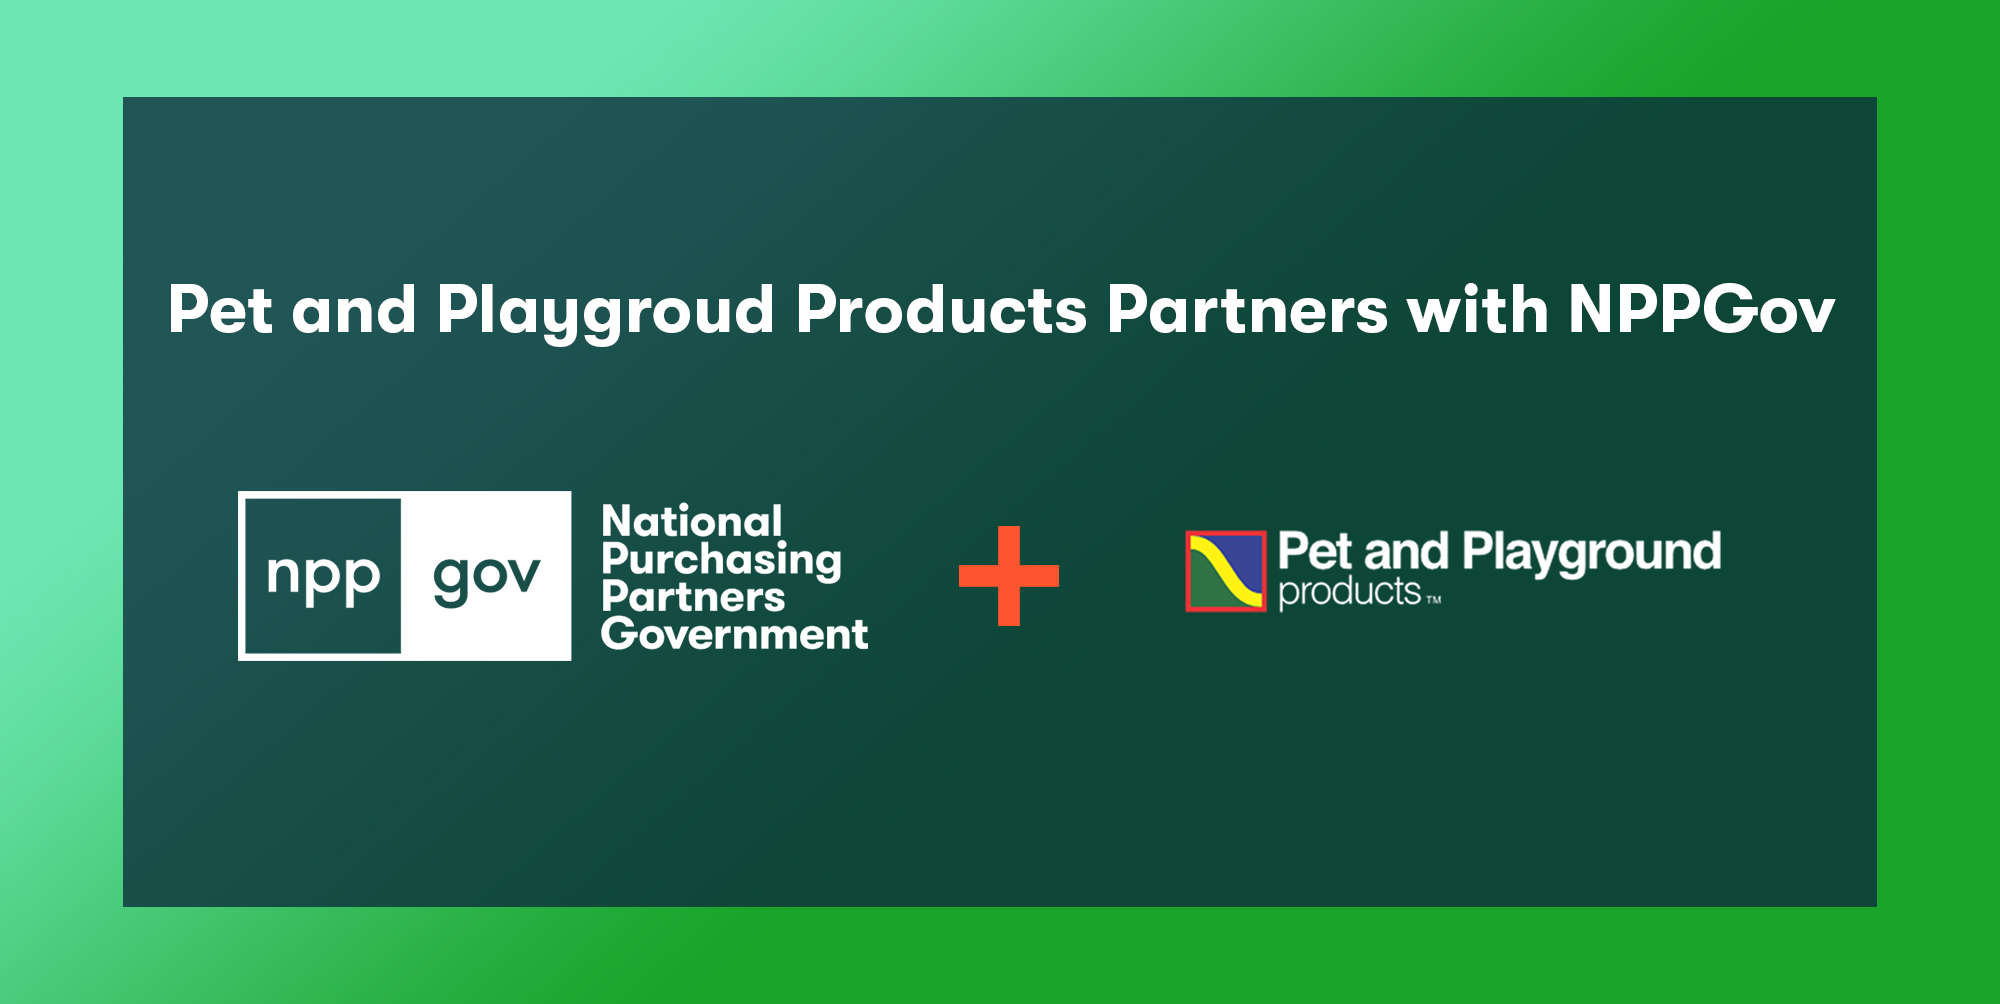 Pet and Playground Partners with NPPGov